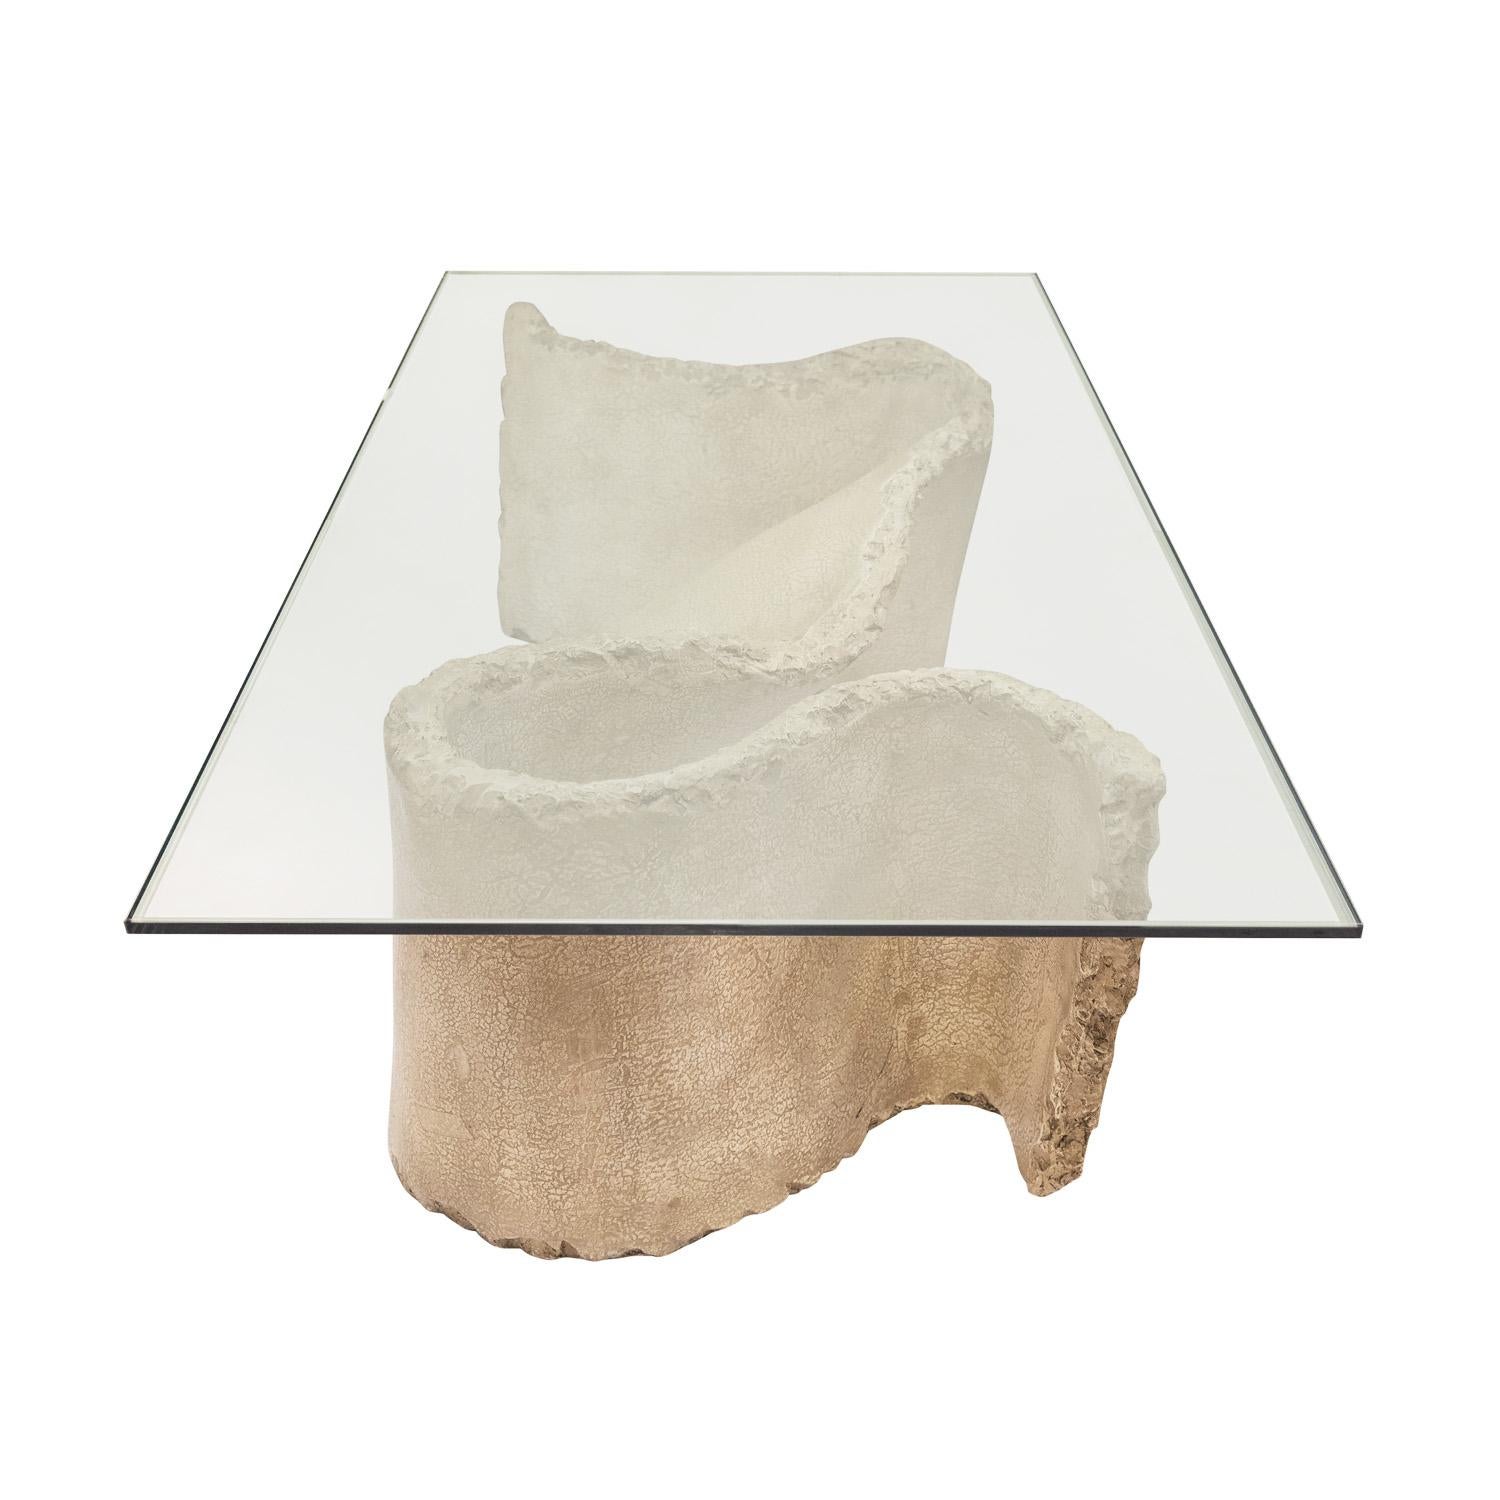 Brutalist Silas Seandel Sculptural Coffee Table with Glass Top 1970s 'Signed' For Sale